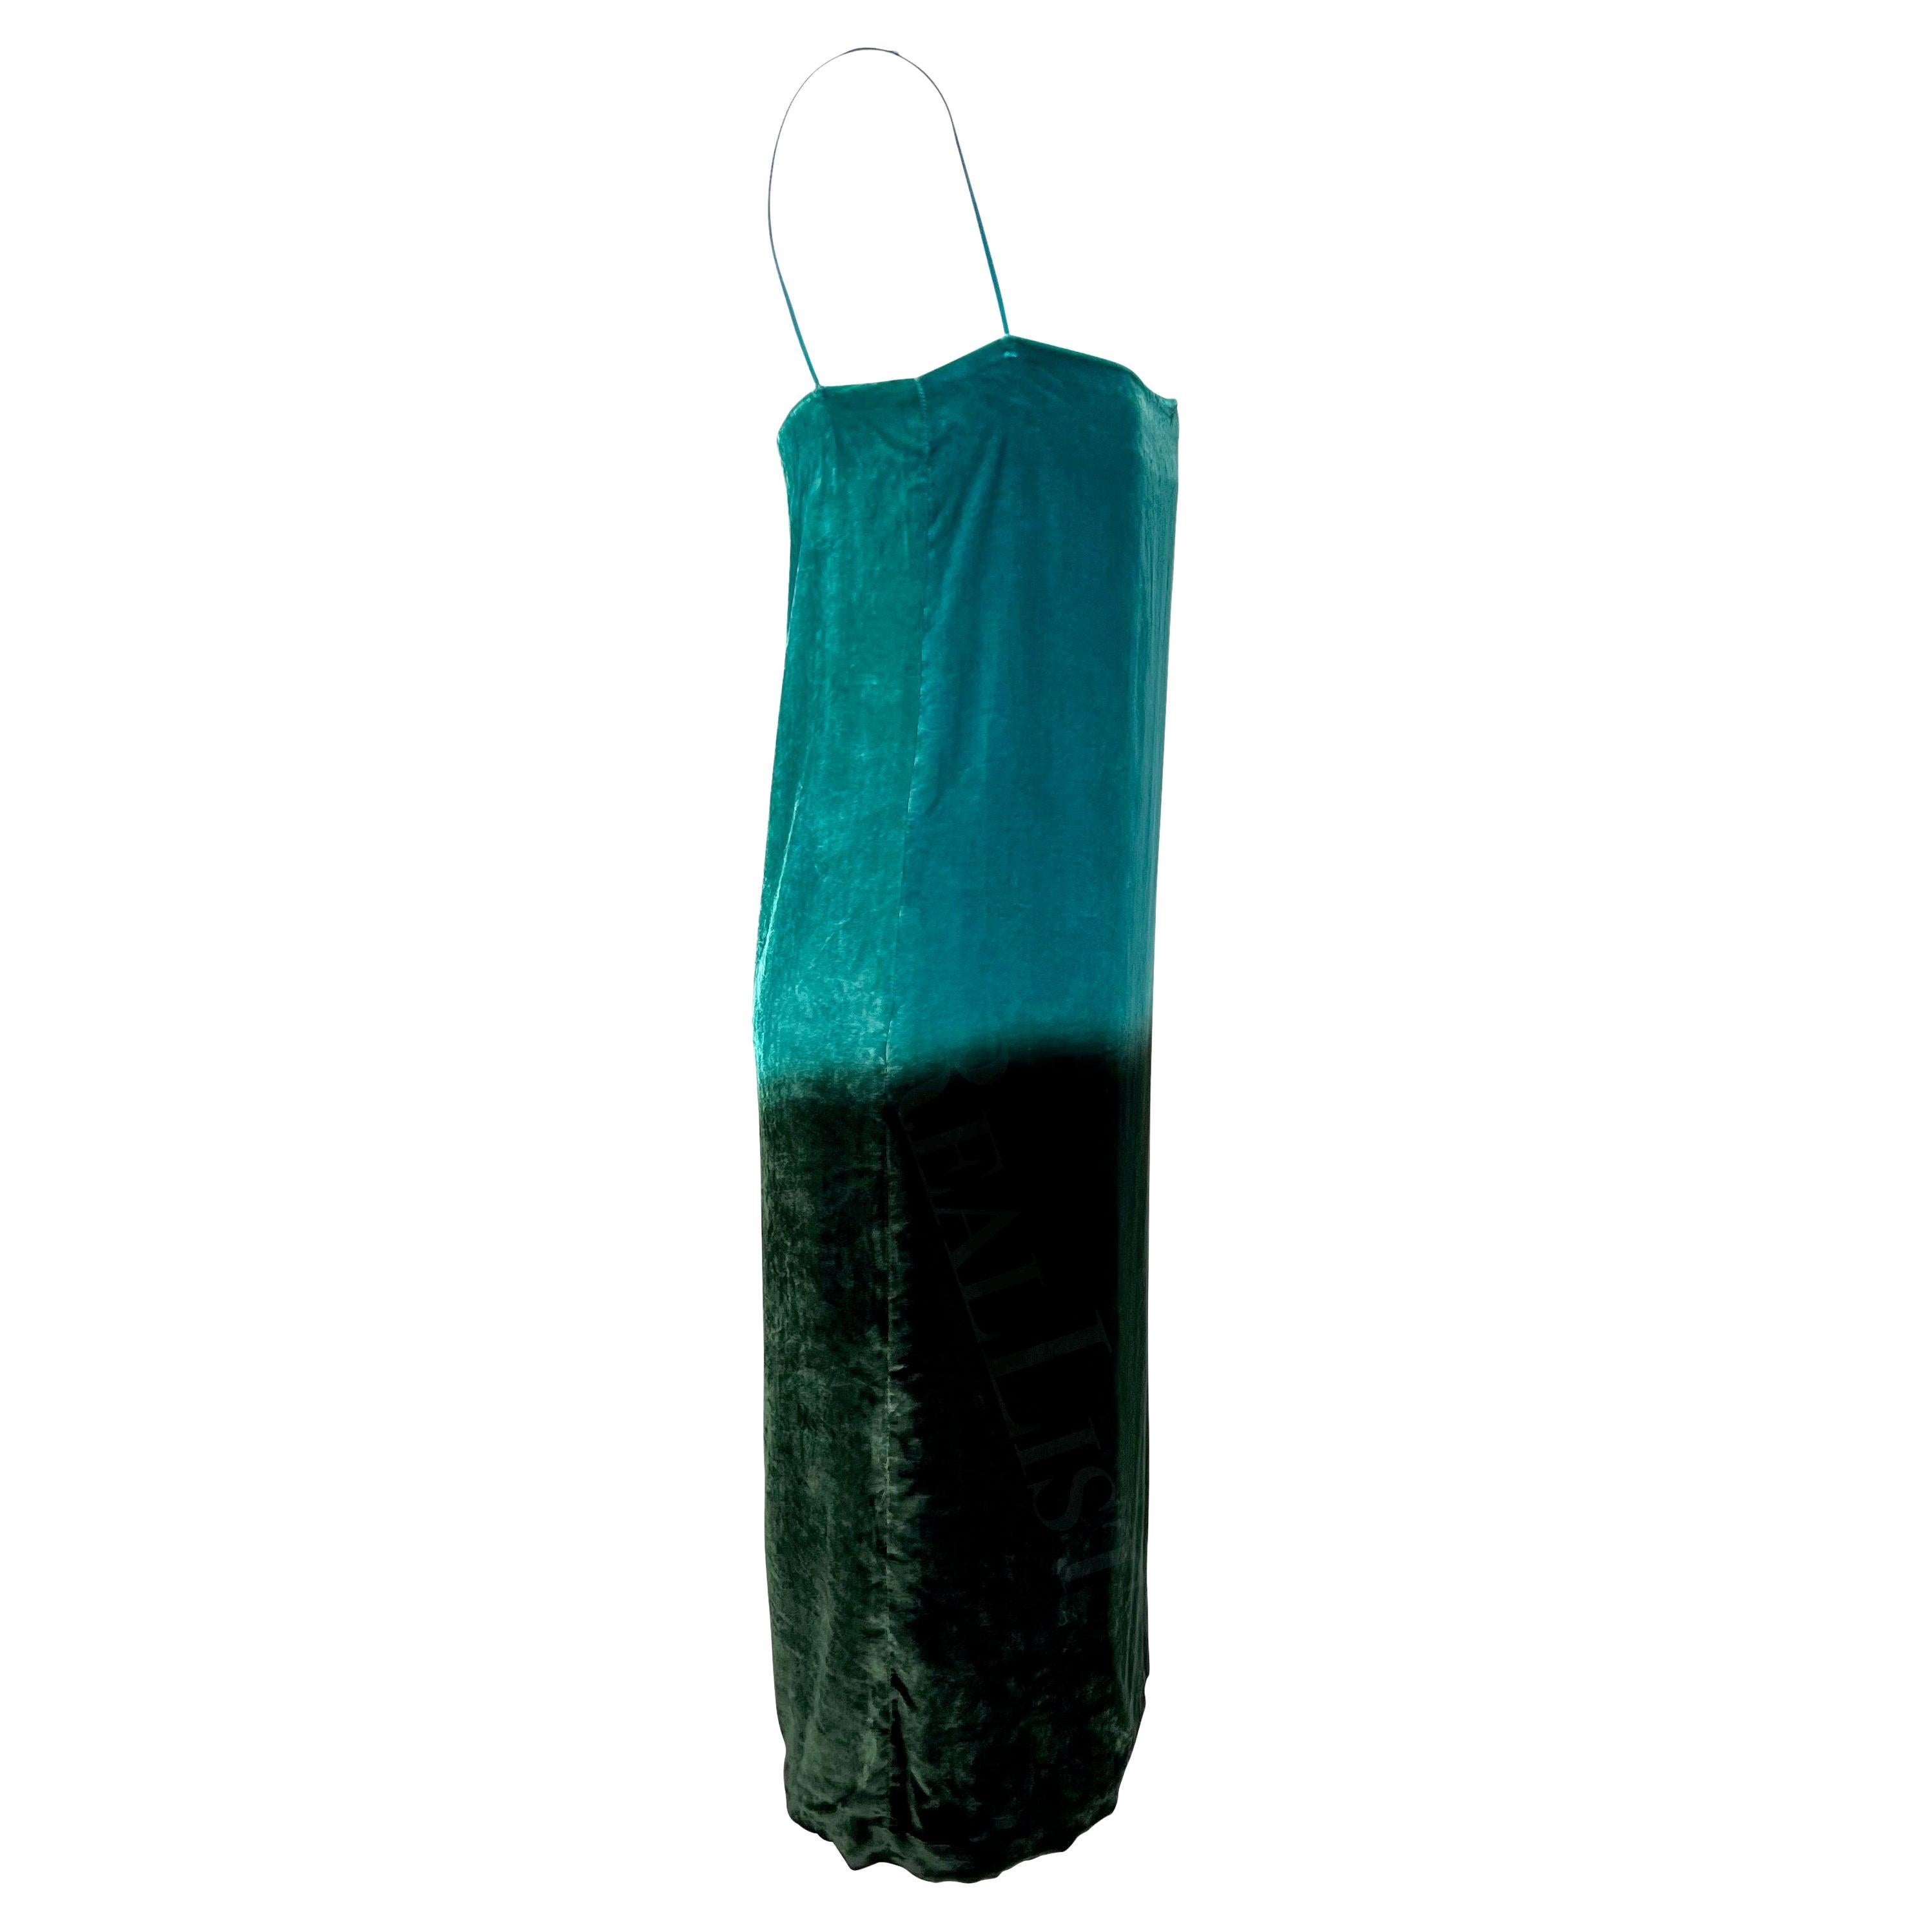 S/S 1997 Gucci by Tom Ford Runway Green Blue Ombré Velvet Shift Dress For Sale 6